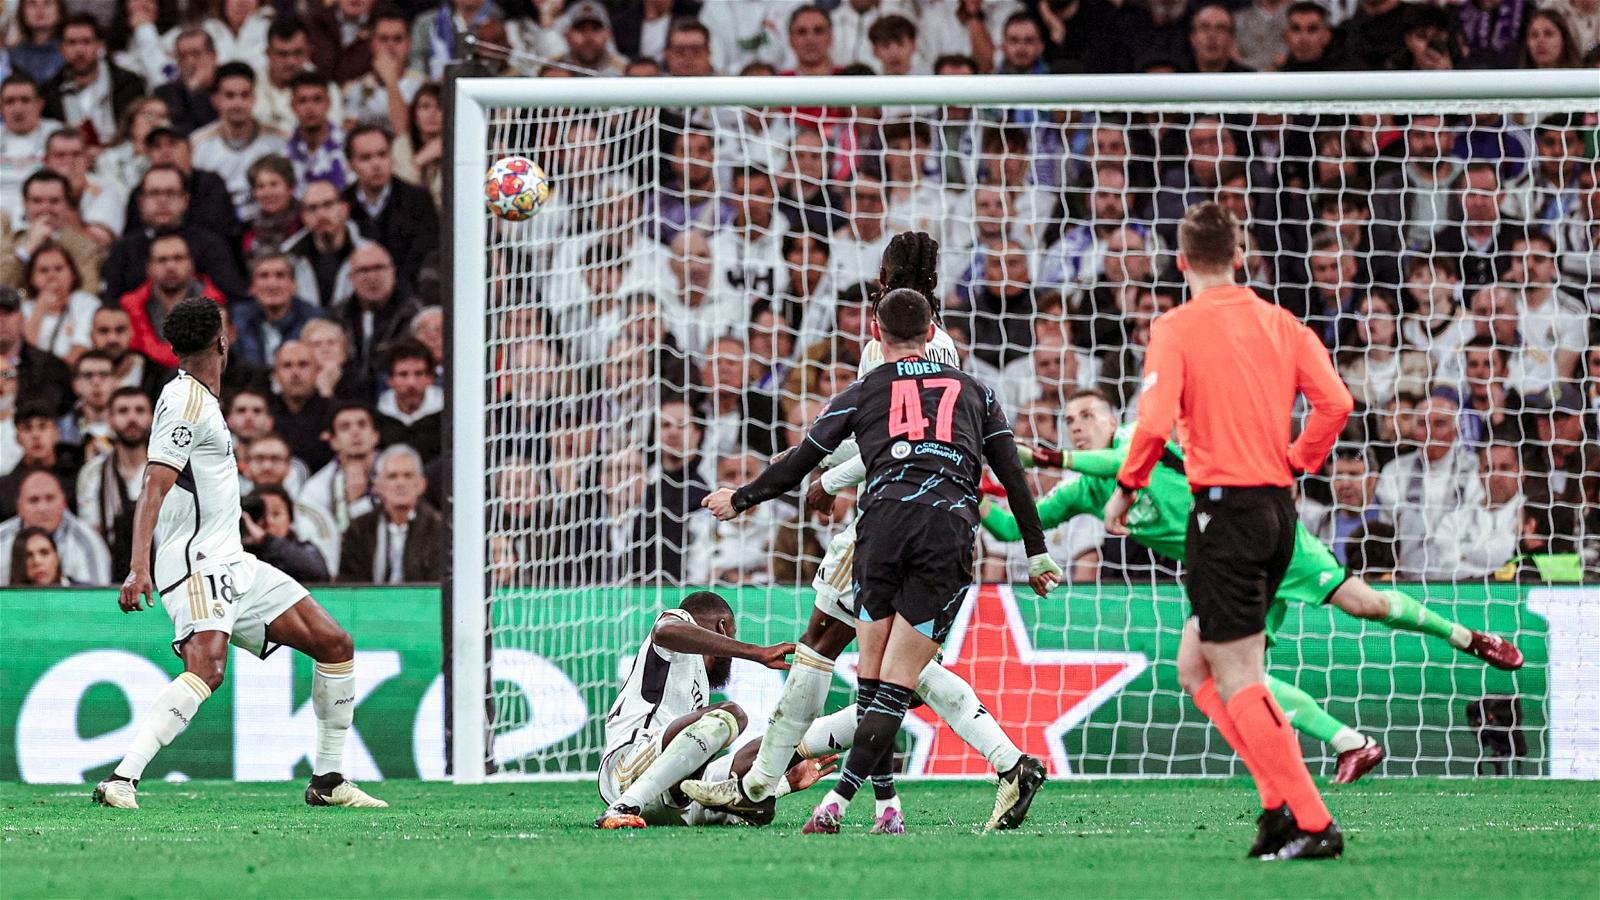 UCL: Thriller in Spain as Real Madrid, Man City end in 3-3 draw